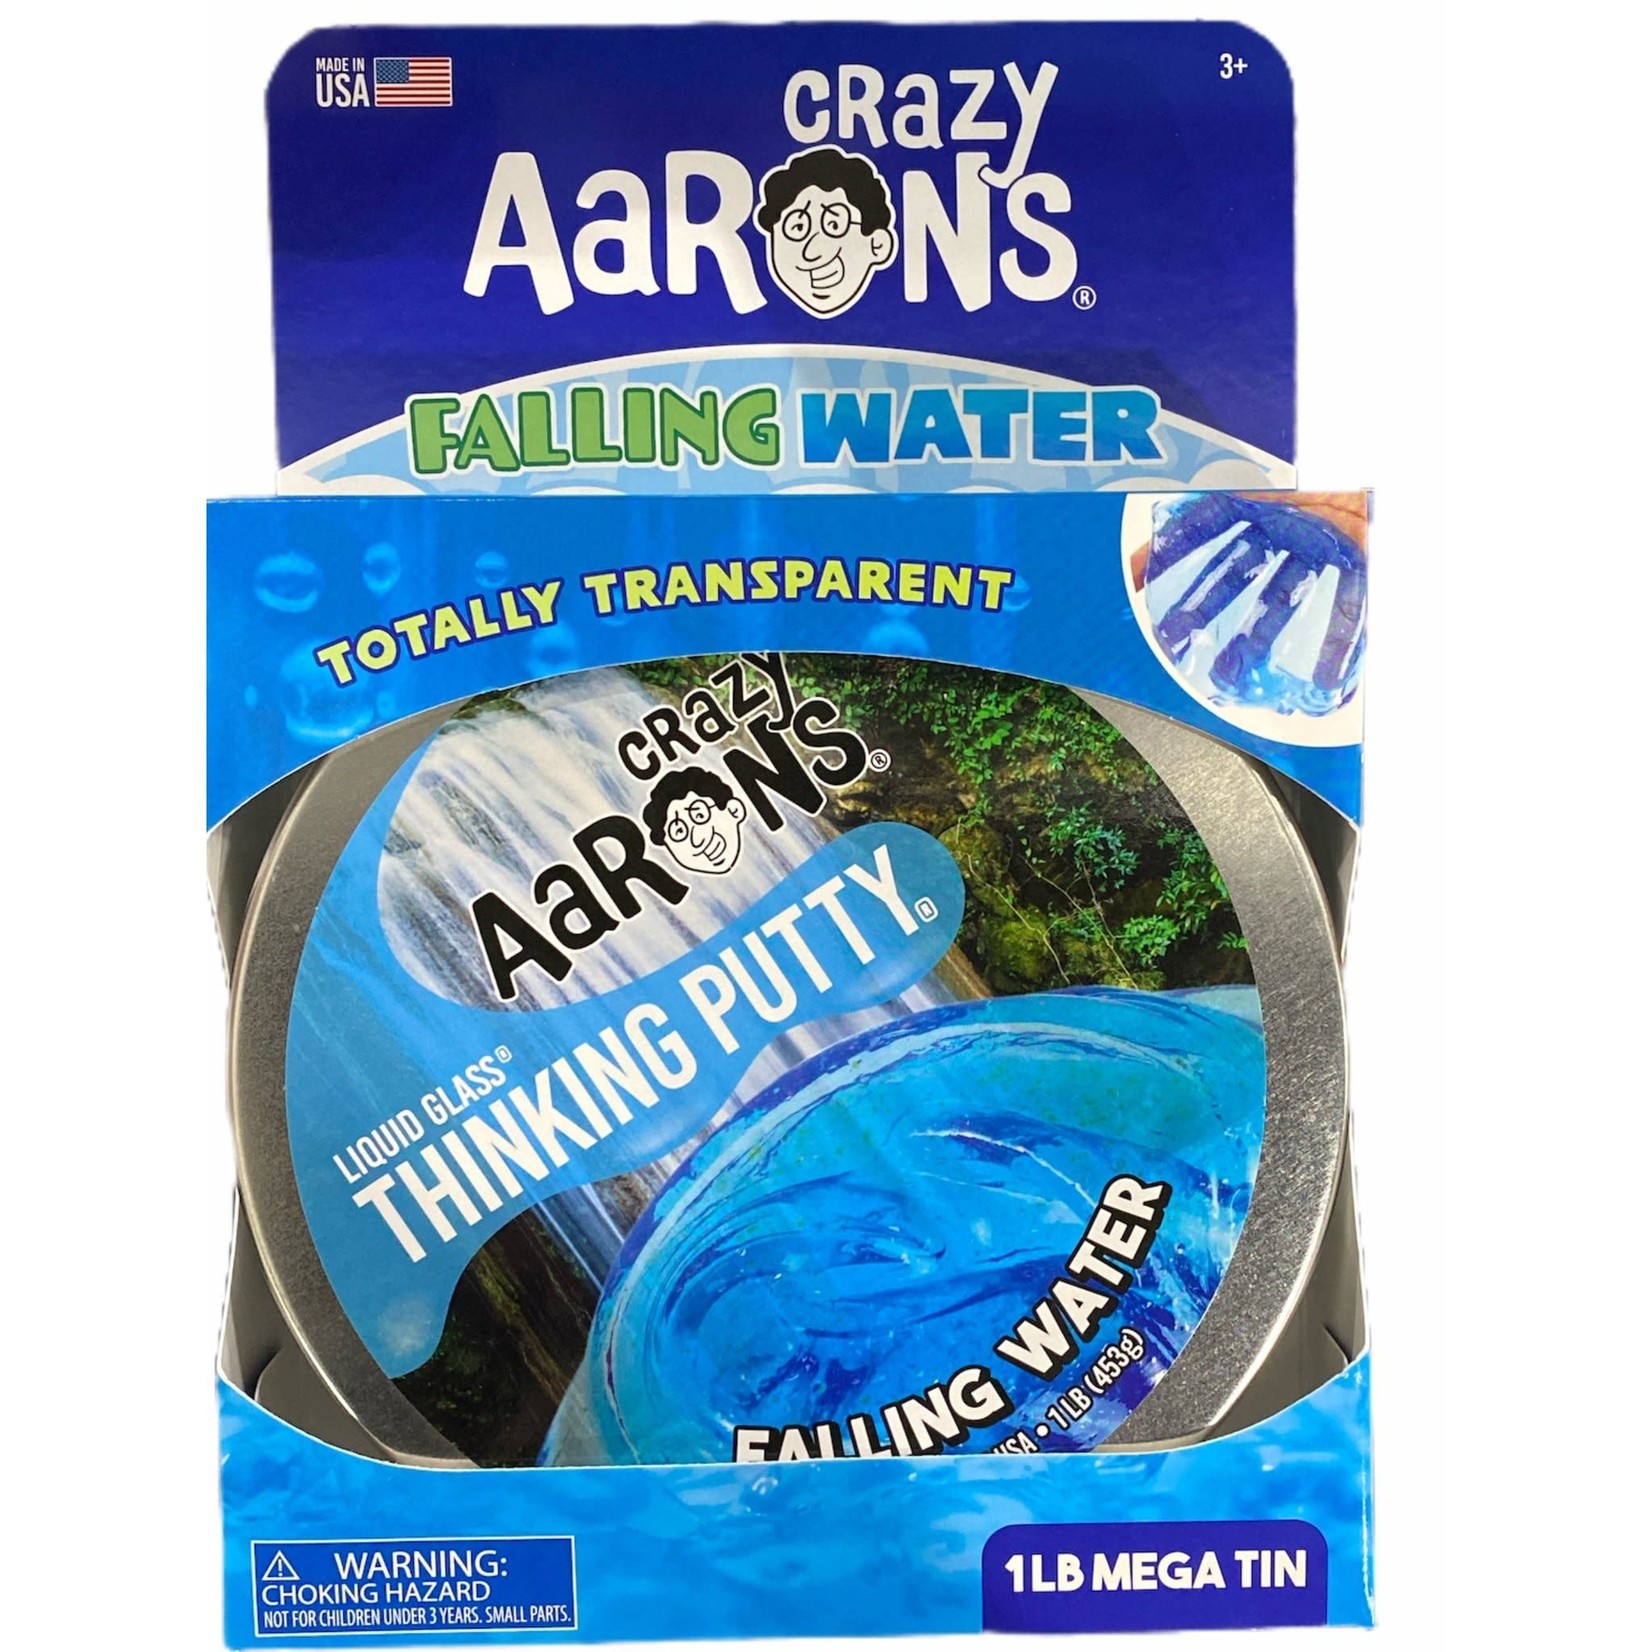 Crazy Aaron's Thinking Putty Falling Water Thinking Putty Mega Tin